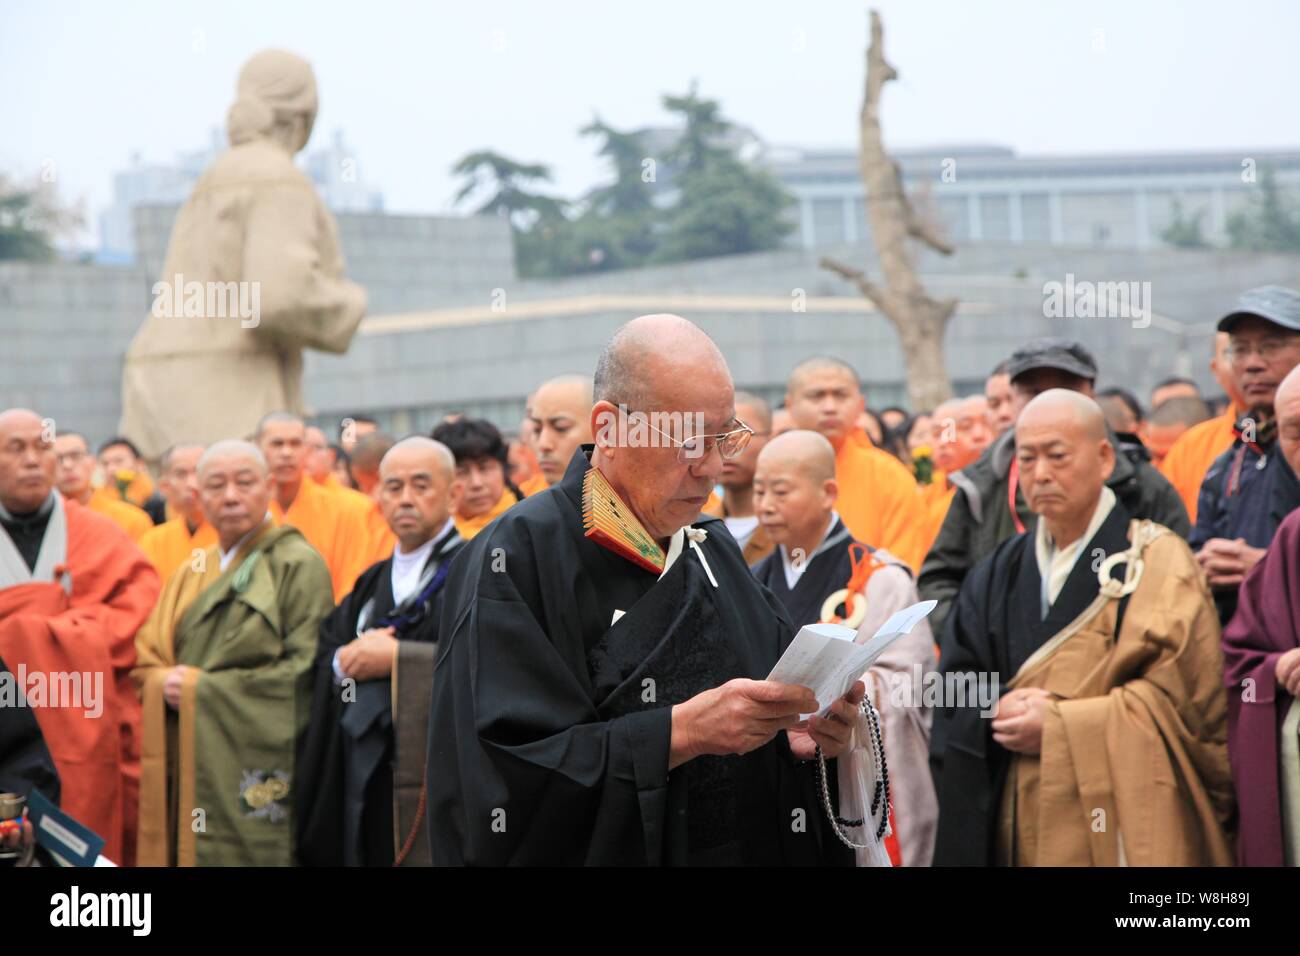 Japanese monk Yoshio Hasegawa, front, chants scriptures during a memorial to mourn for the victims of the Nanjing Massacre at the Museum of Victims in Stock Photo